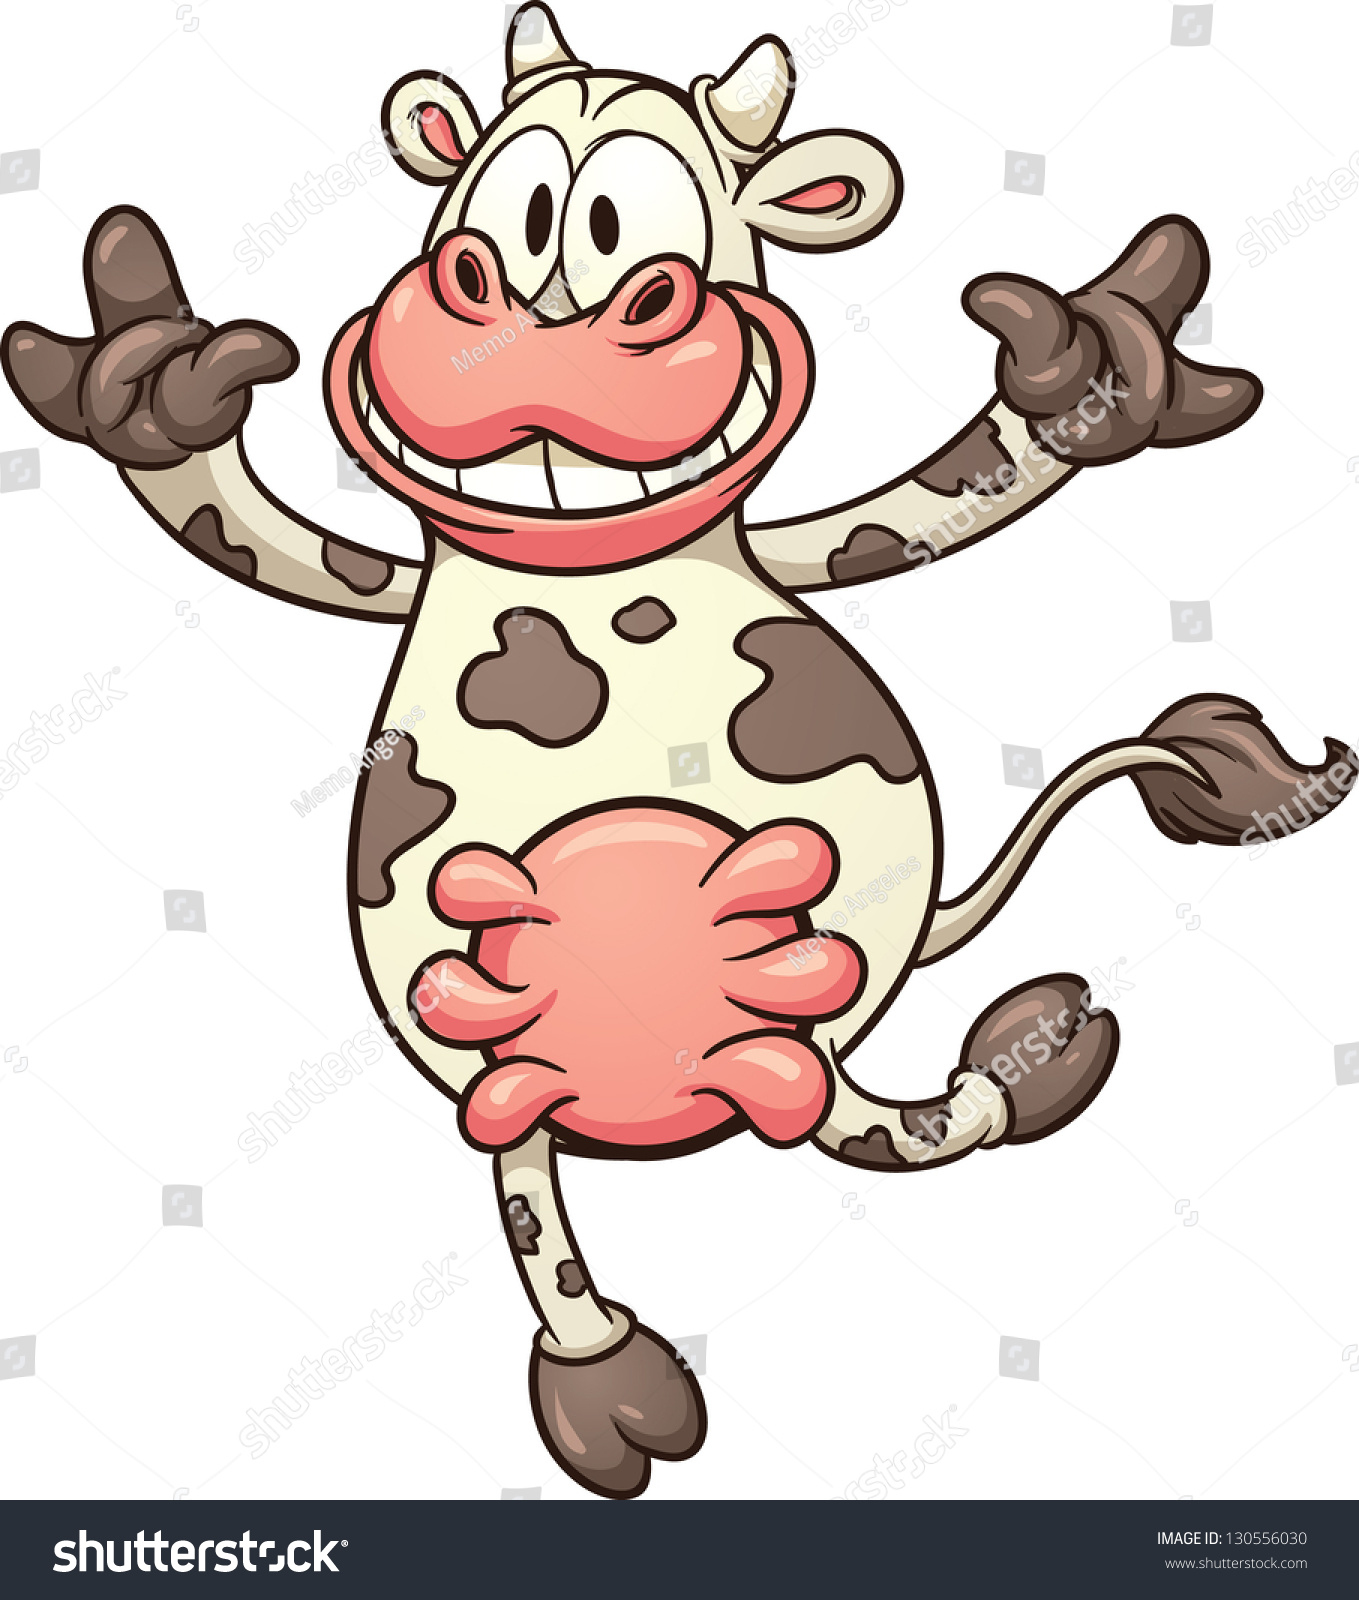 cow clipart simple - photo #34